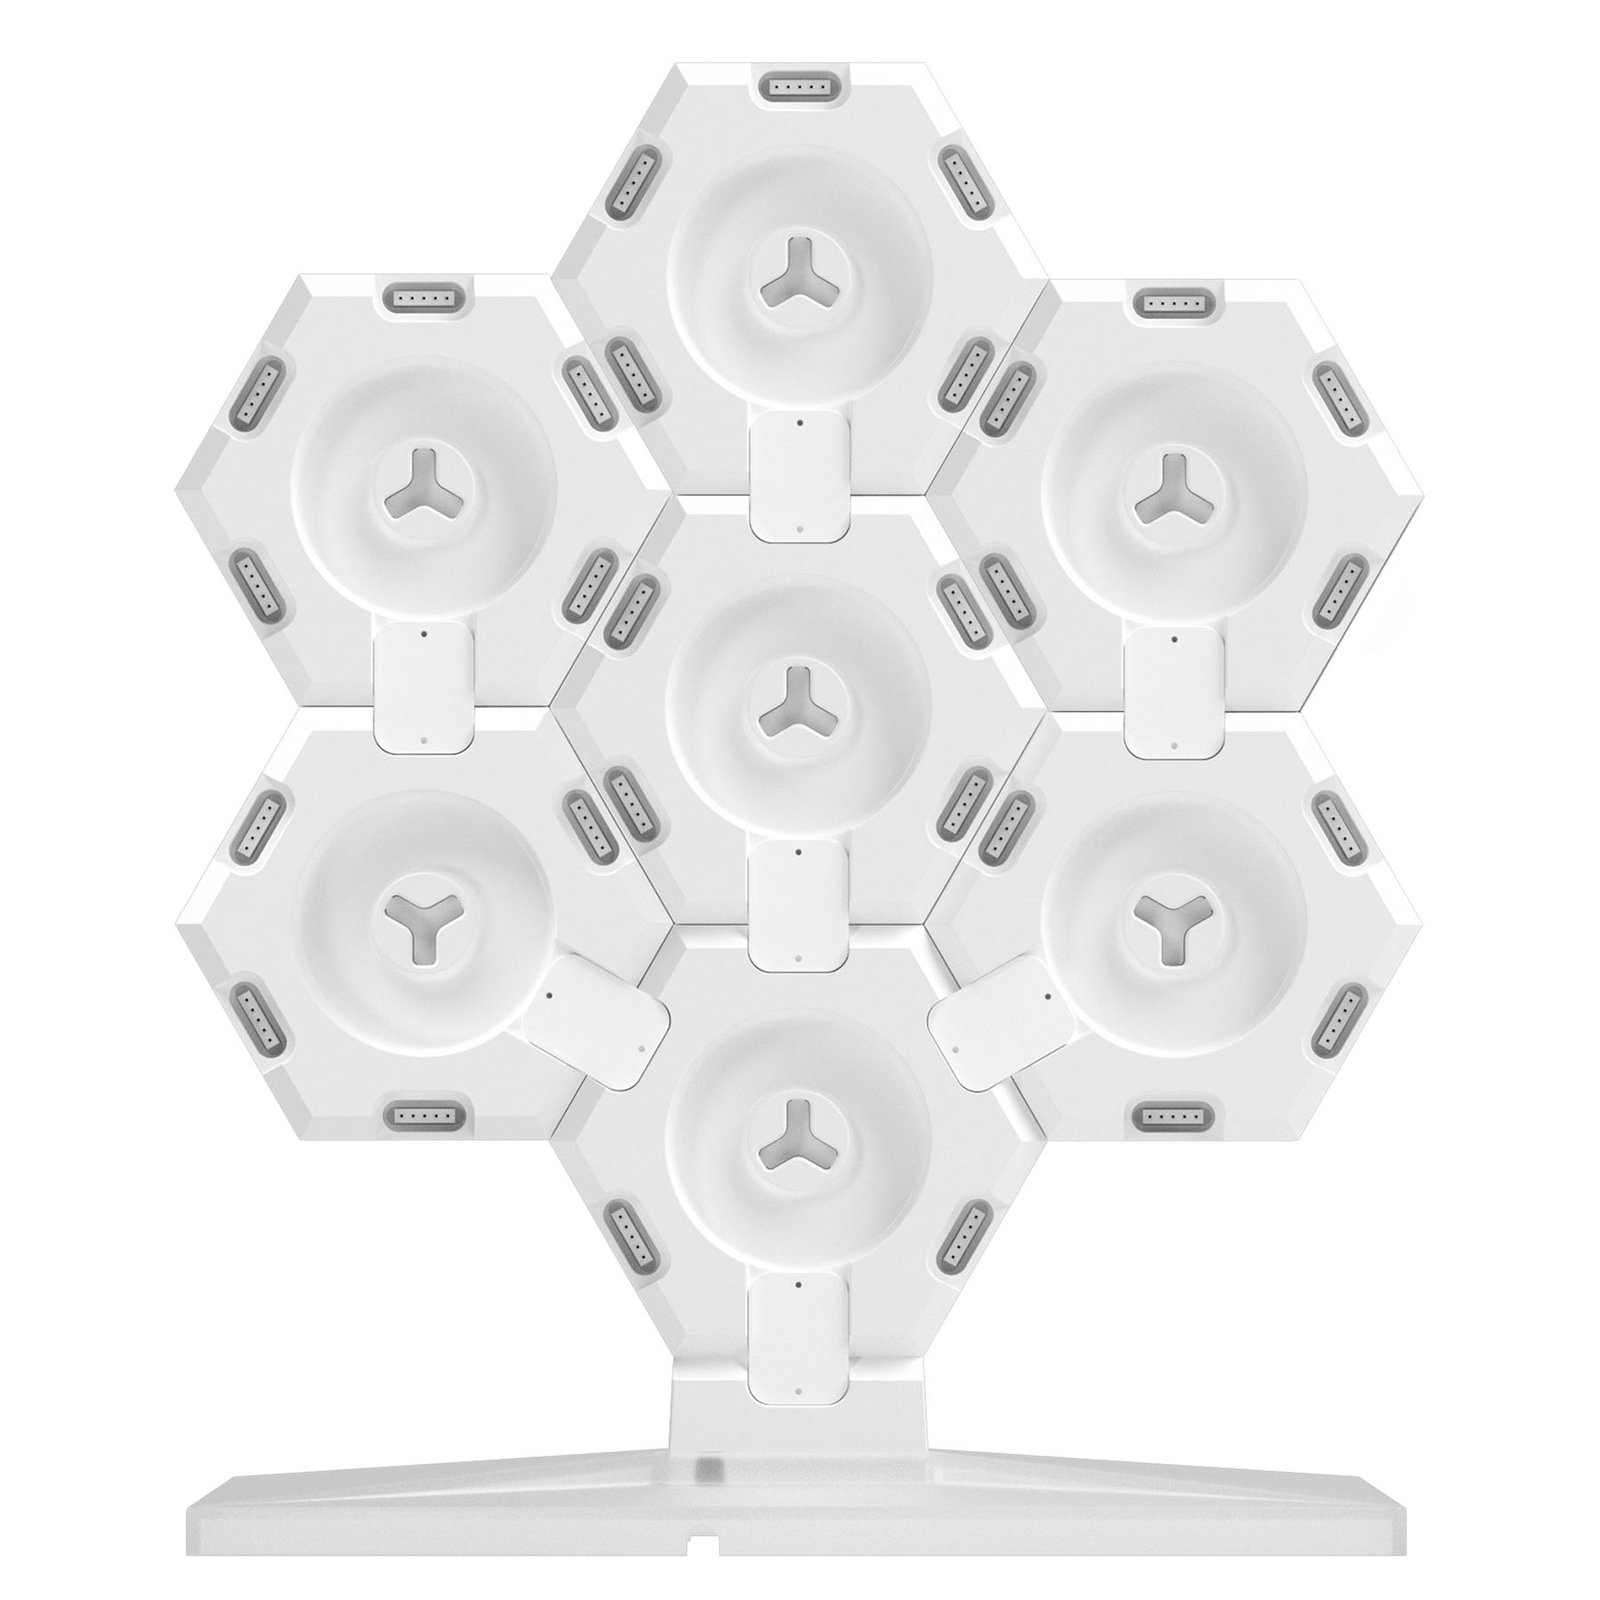 Cololight Plus starter kit, 7 modules with base